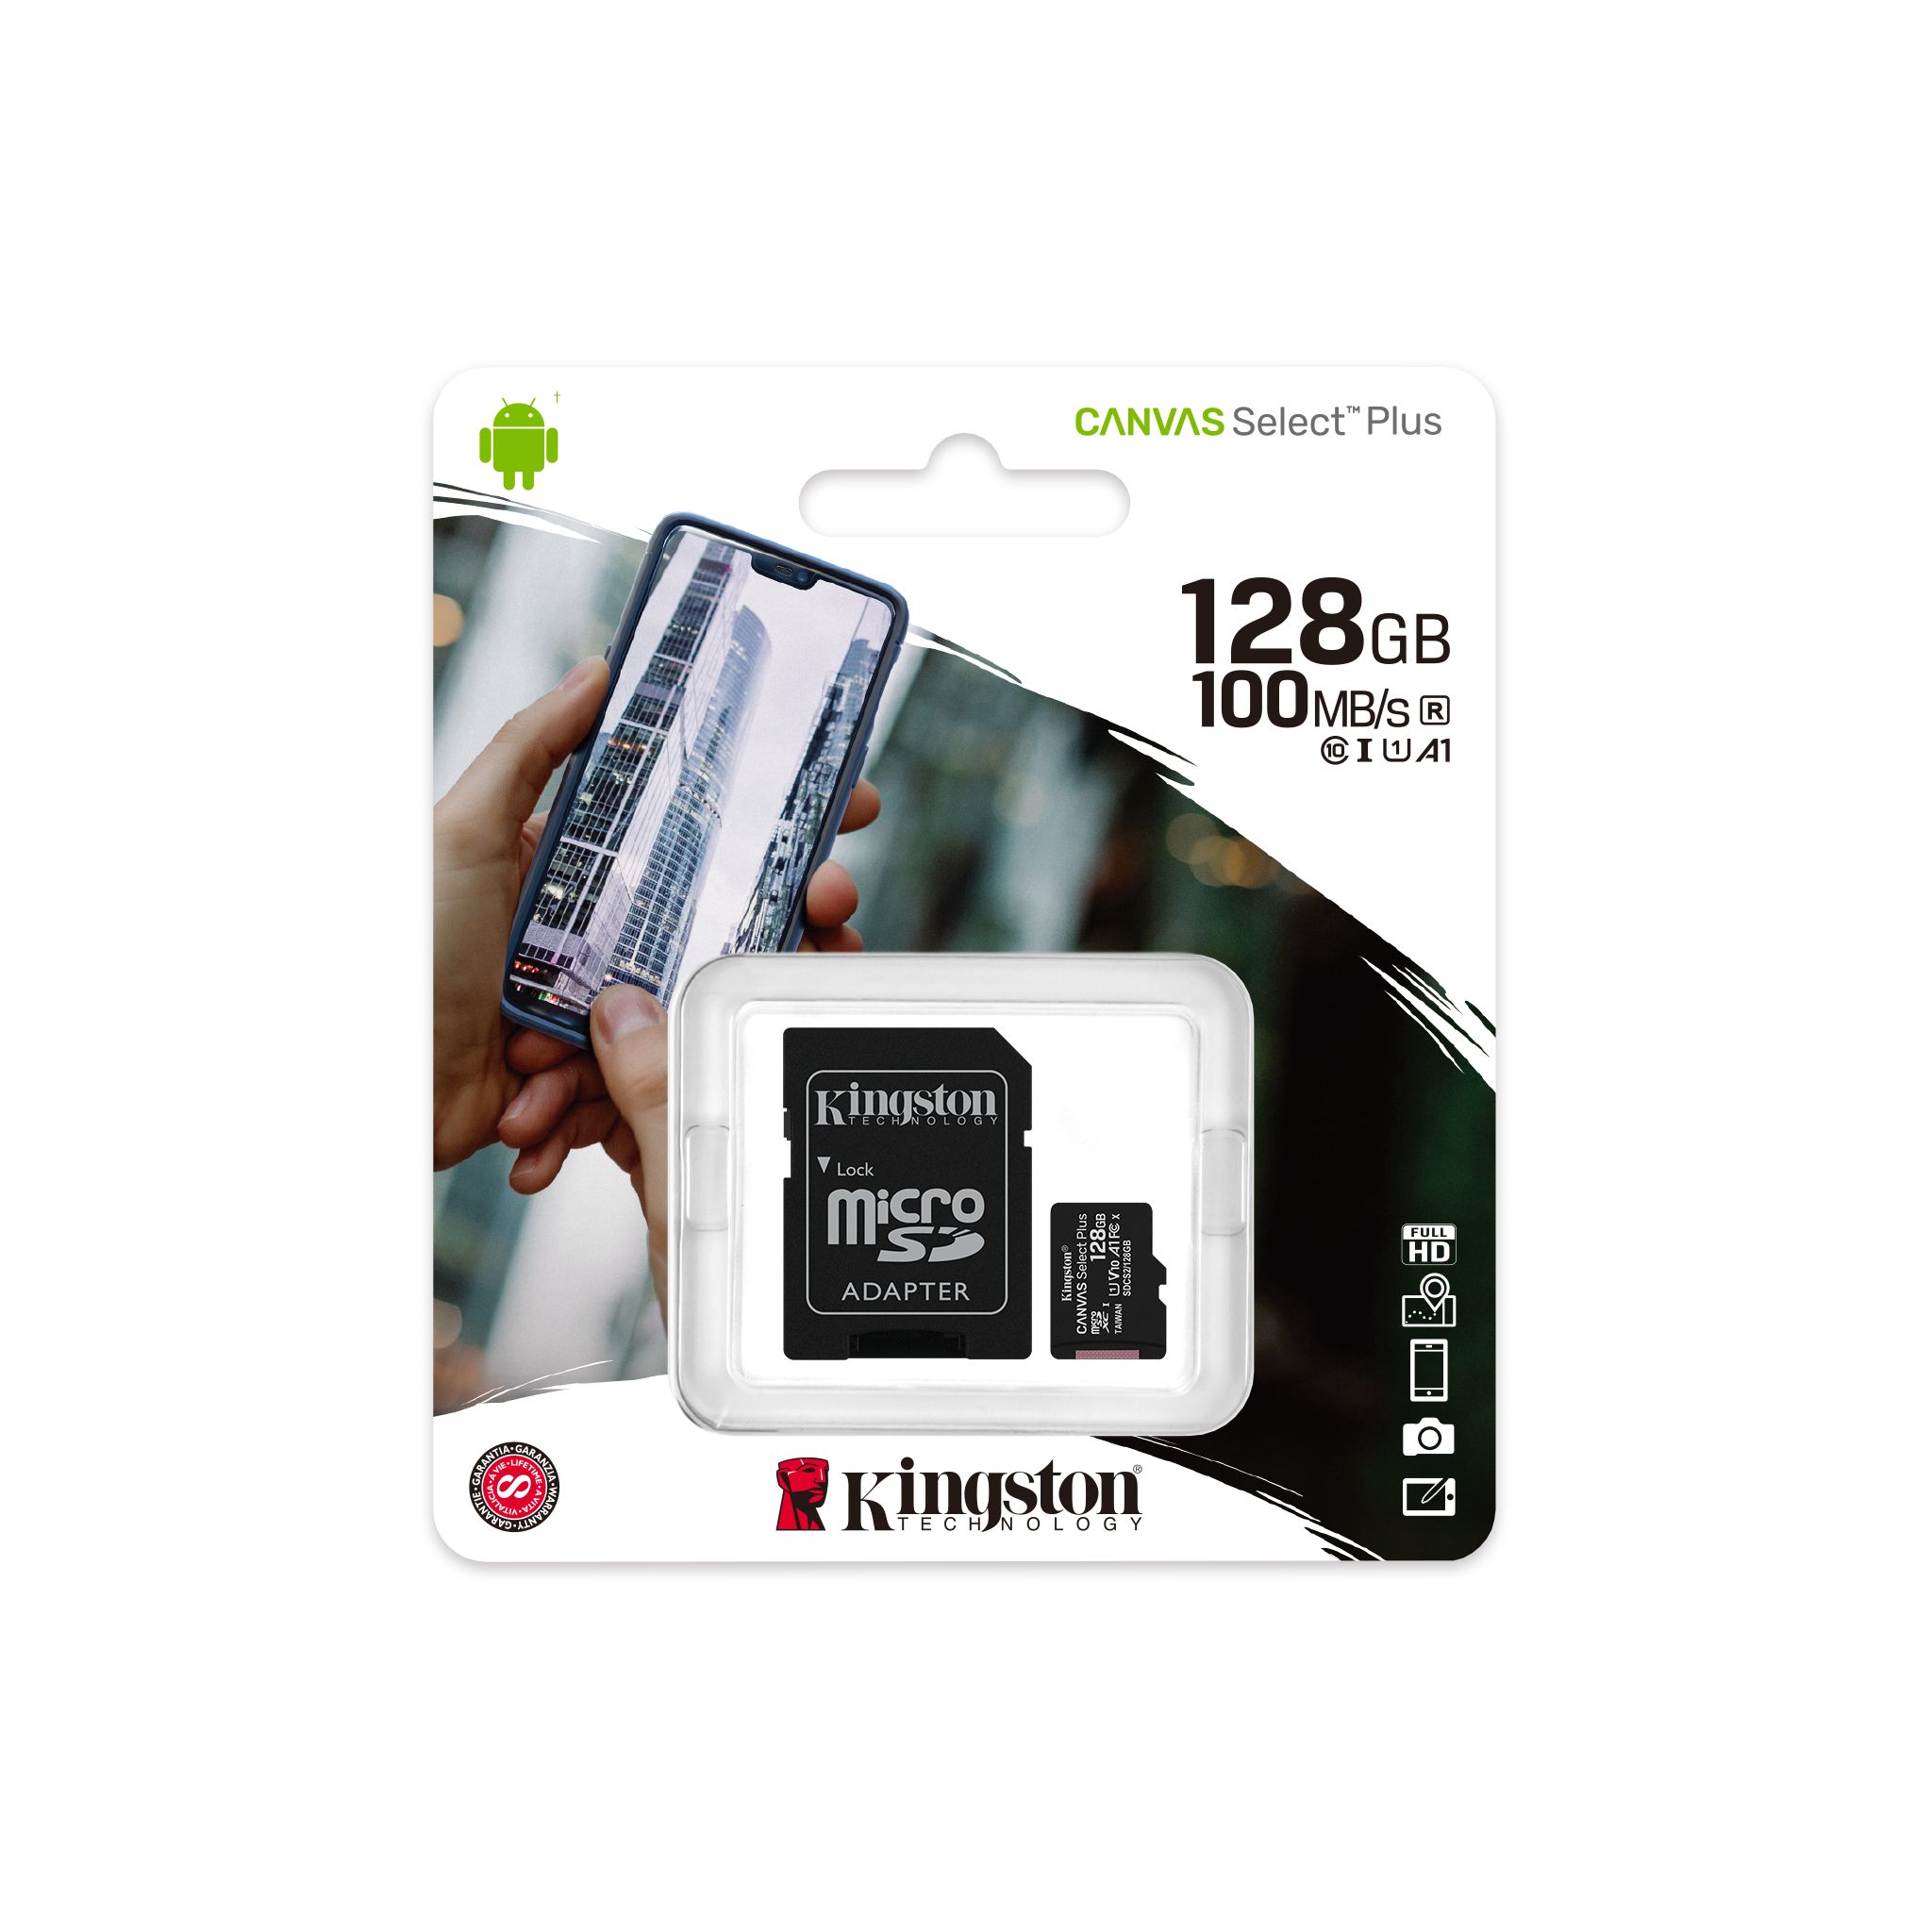 Kingston 128GB Micromax Bolt A068 MicroSDXC Canvas Select Plus Card Verified by SanFlash. 100MBs Works with Kingston 